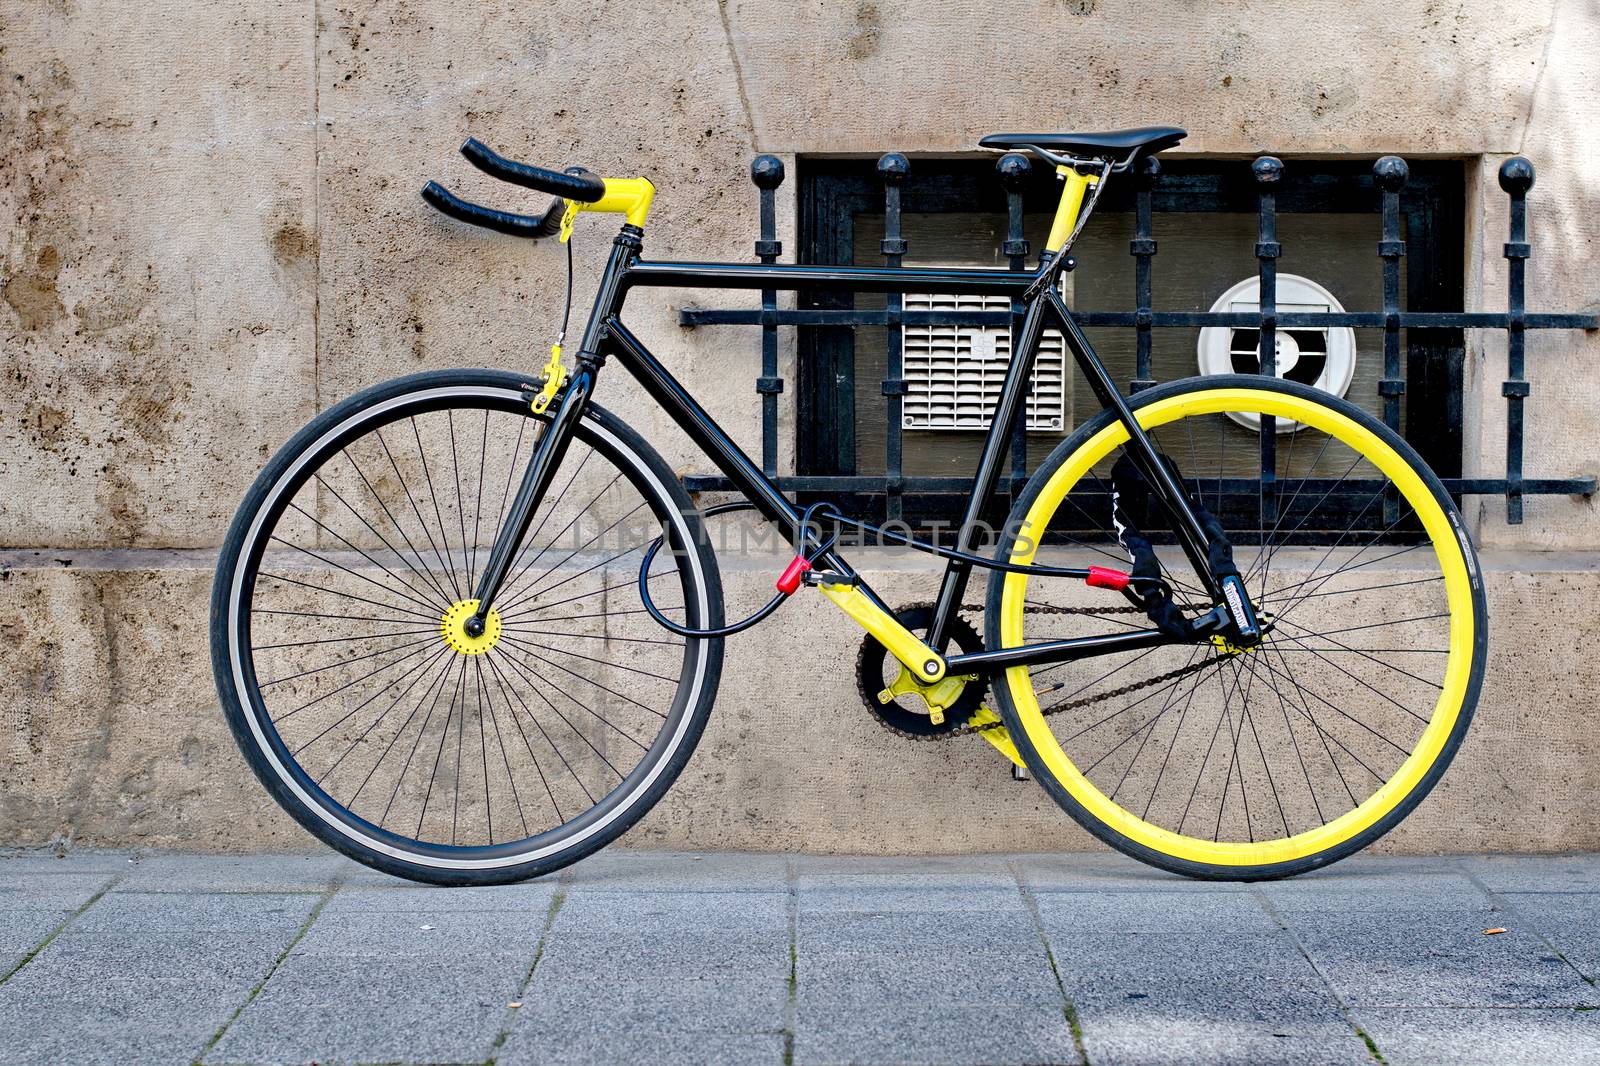 Cool black and yellow bike locked by anderm